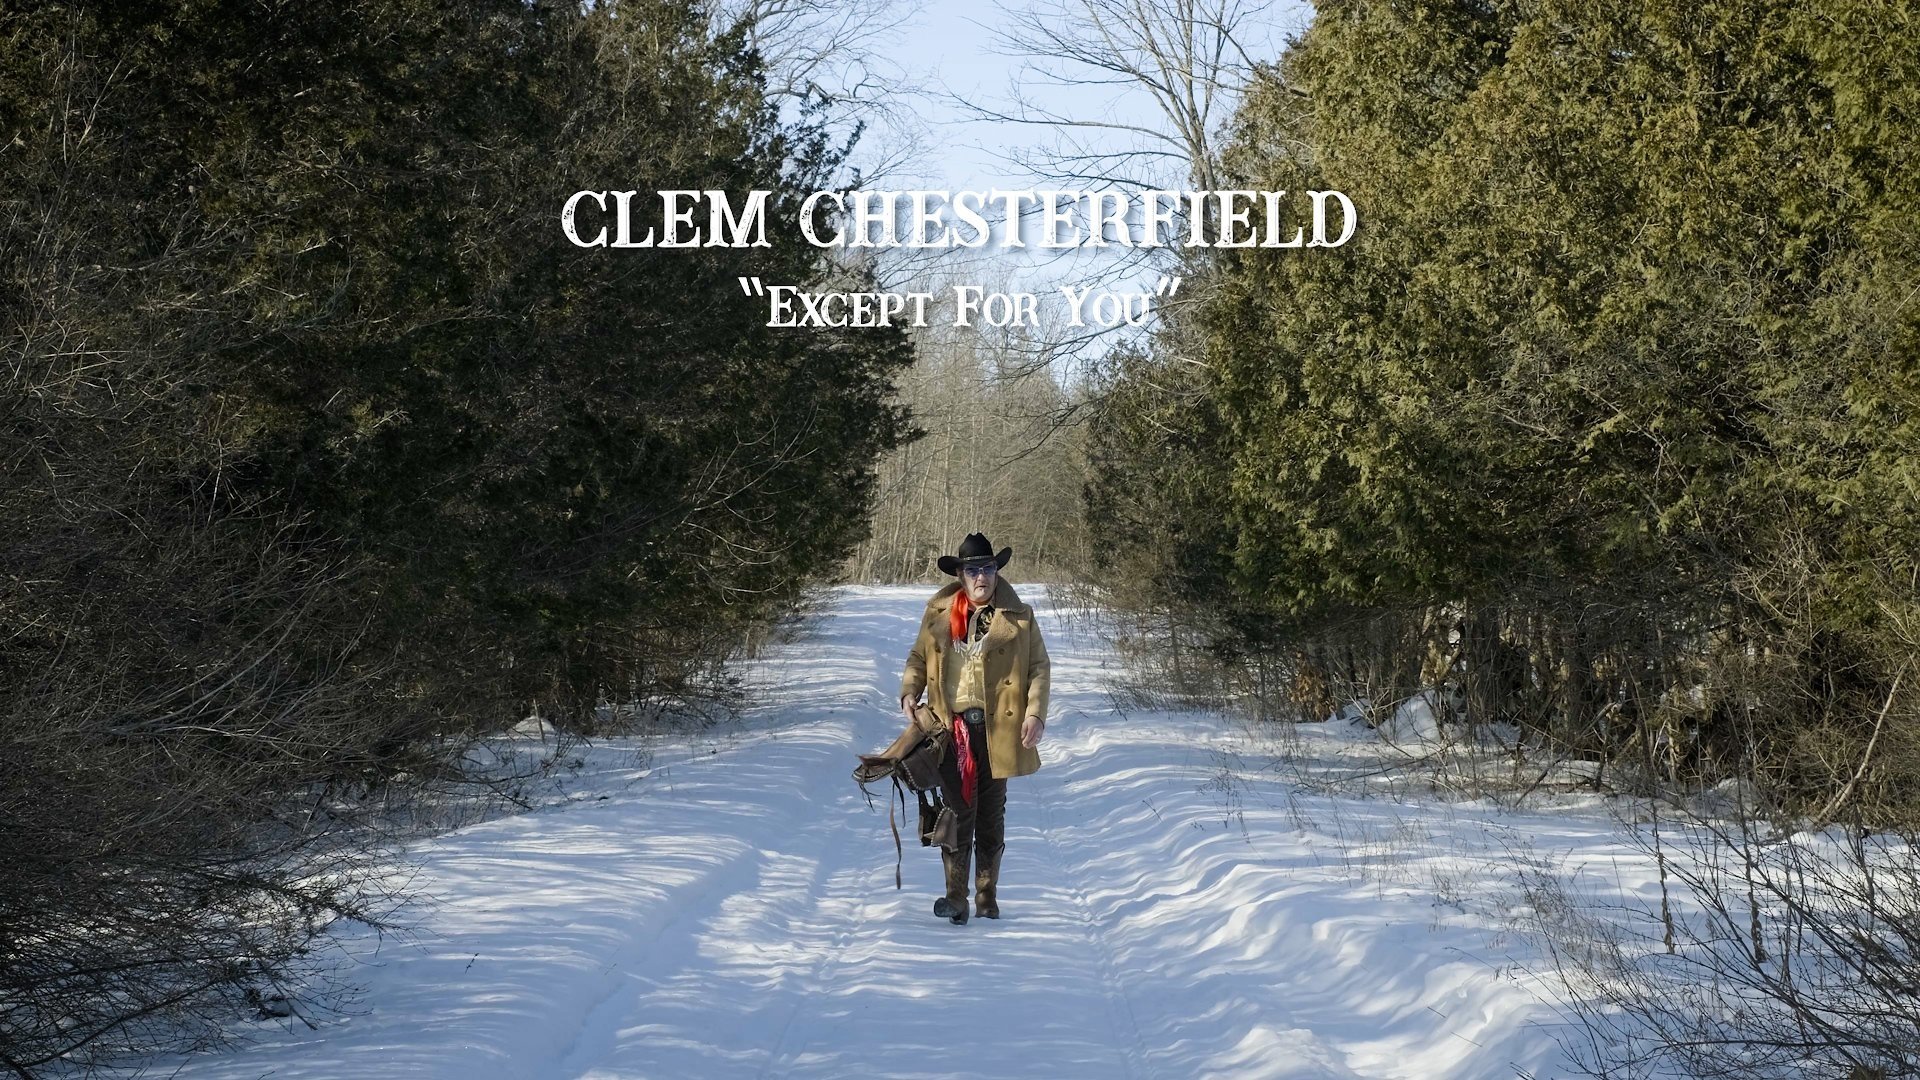 EXCEPT FOR YOU // CLEM CHESTERFIELD